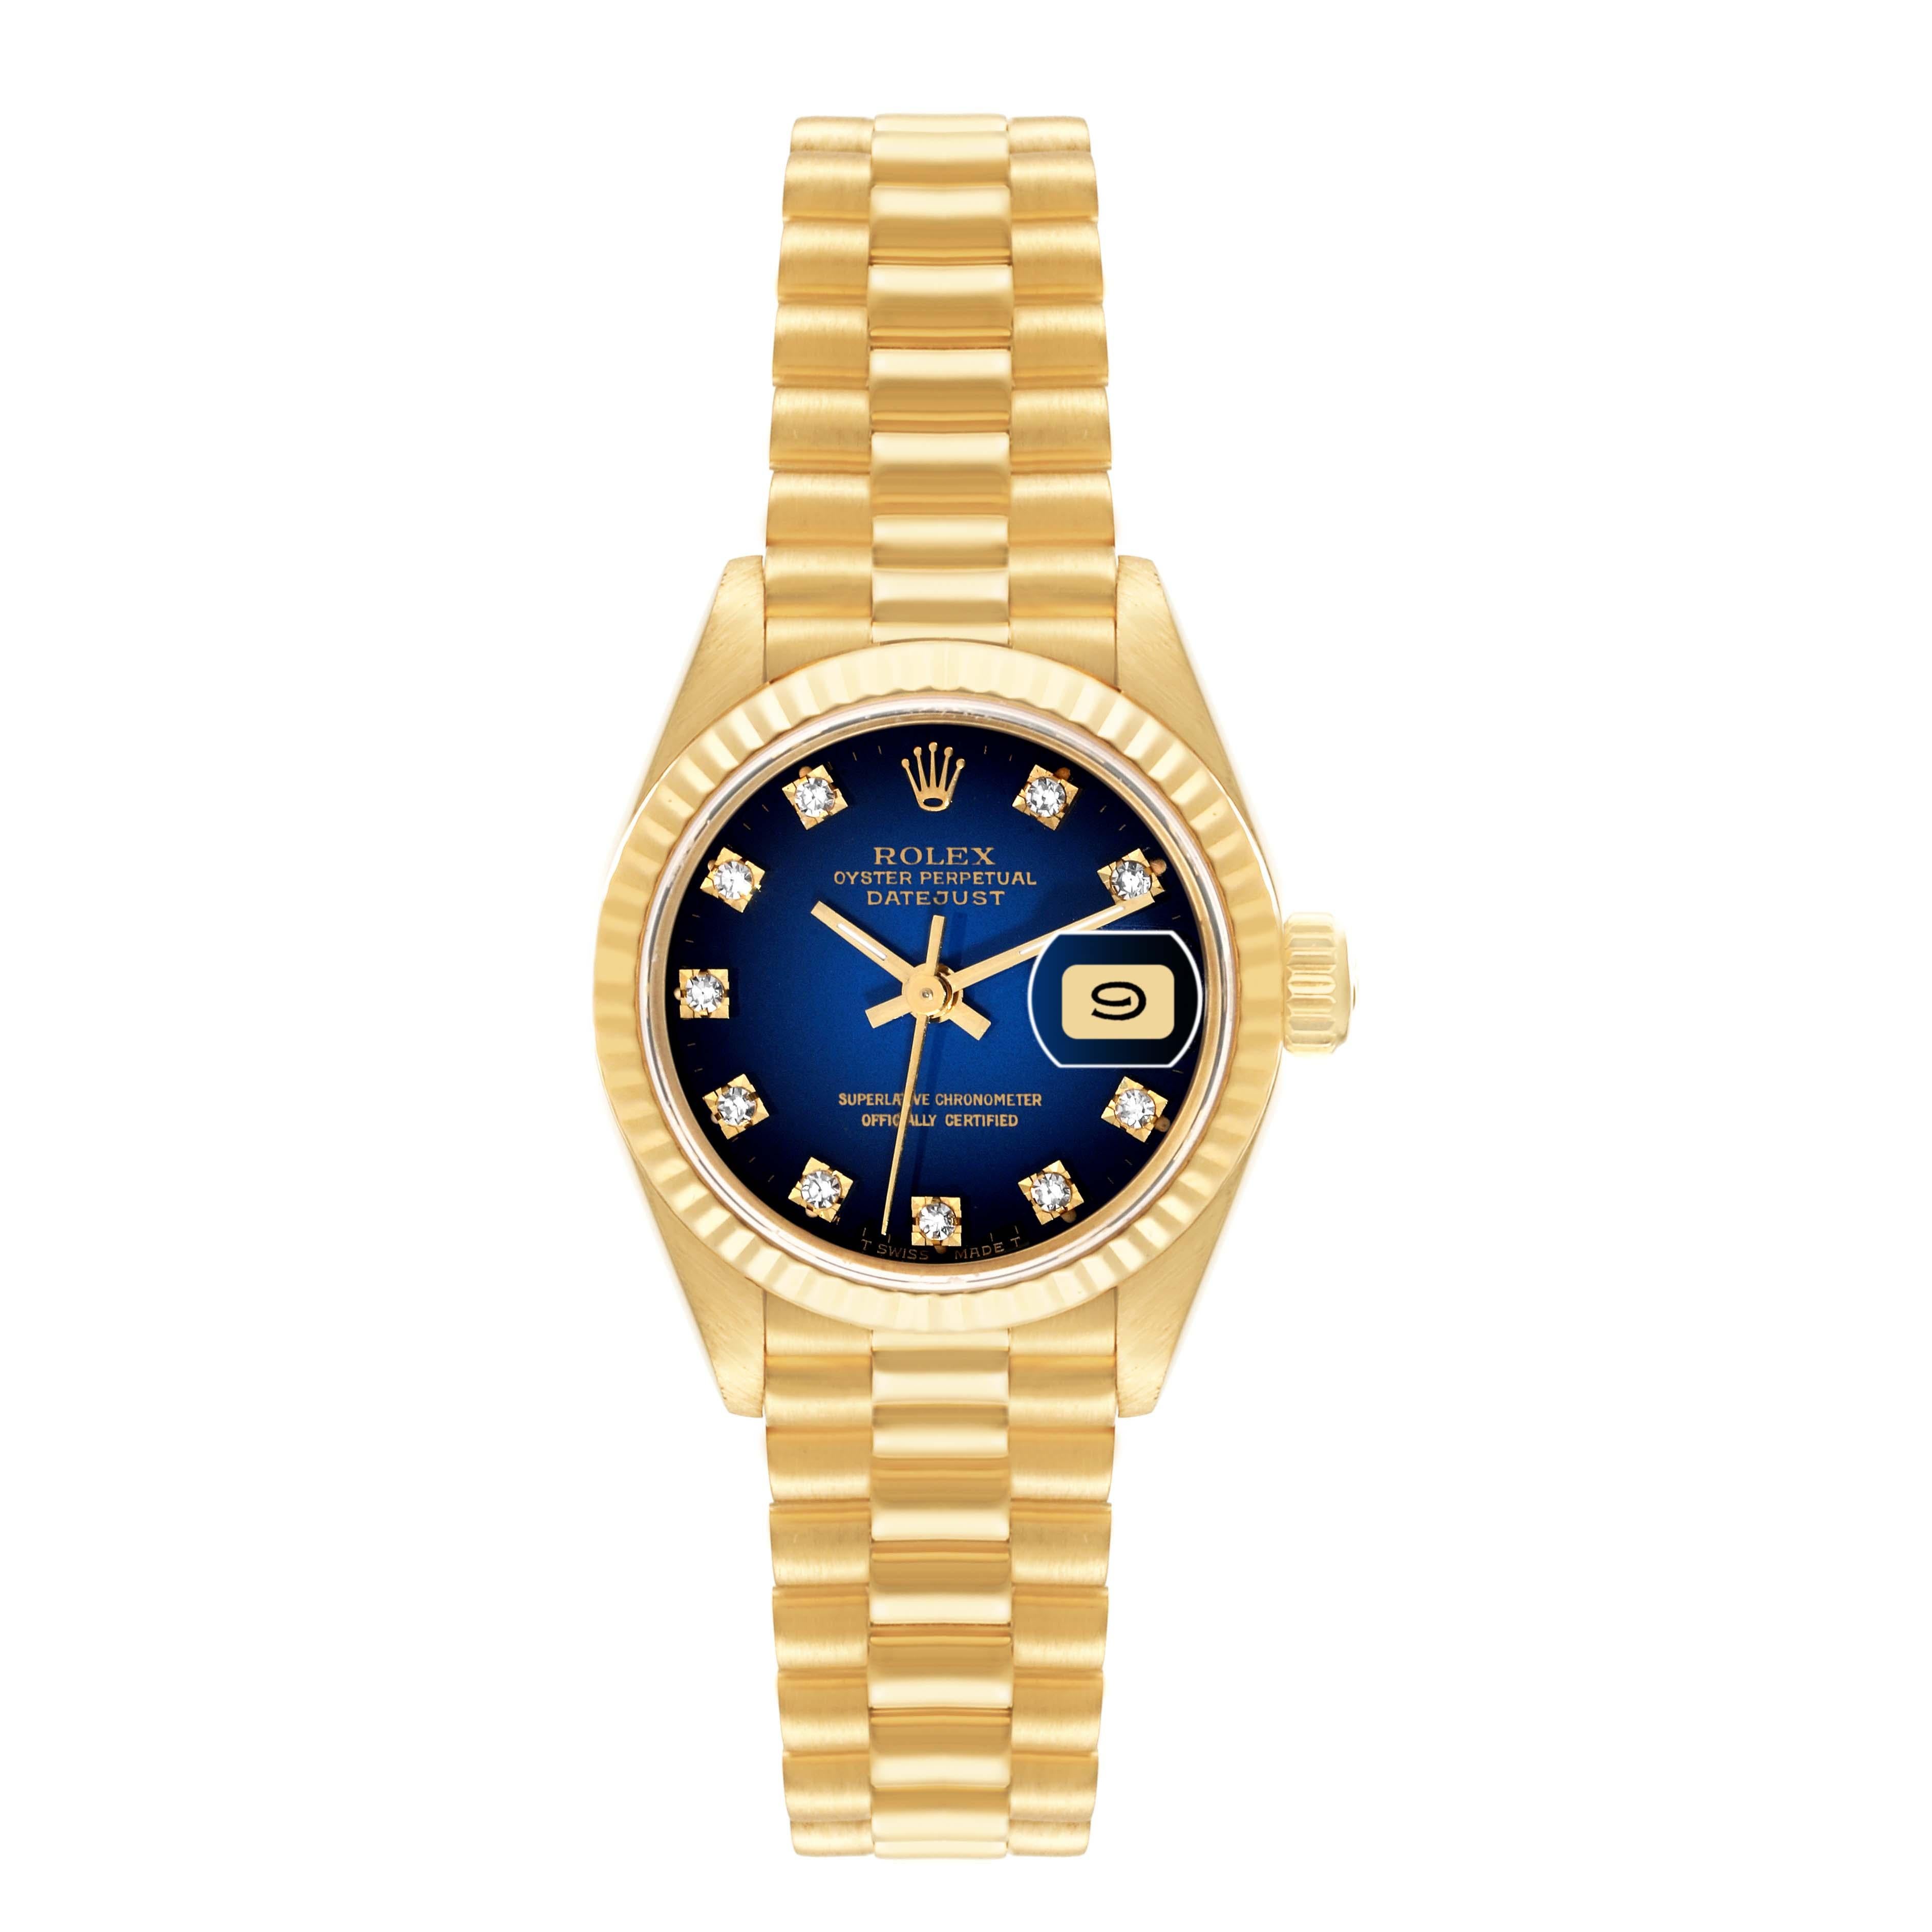 Rolex Datejust President Yellow Gold Vignette Diamond Dial Ladies Watch 69178. Officially certified chronometer automatic self-winding movement. 18k yellow gold oyster case 26.0 mm in diameter. Rolex logo on the crown. 18k yellow gold fluted bezel.